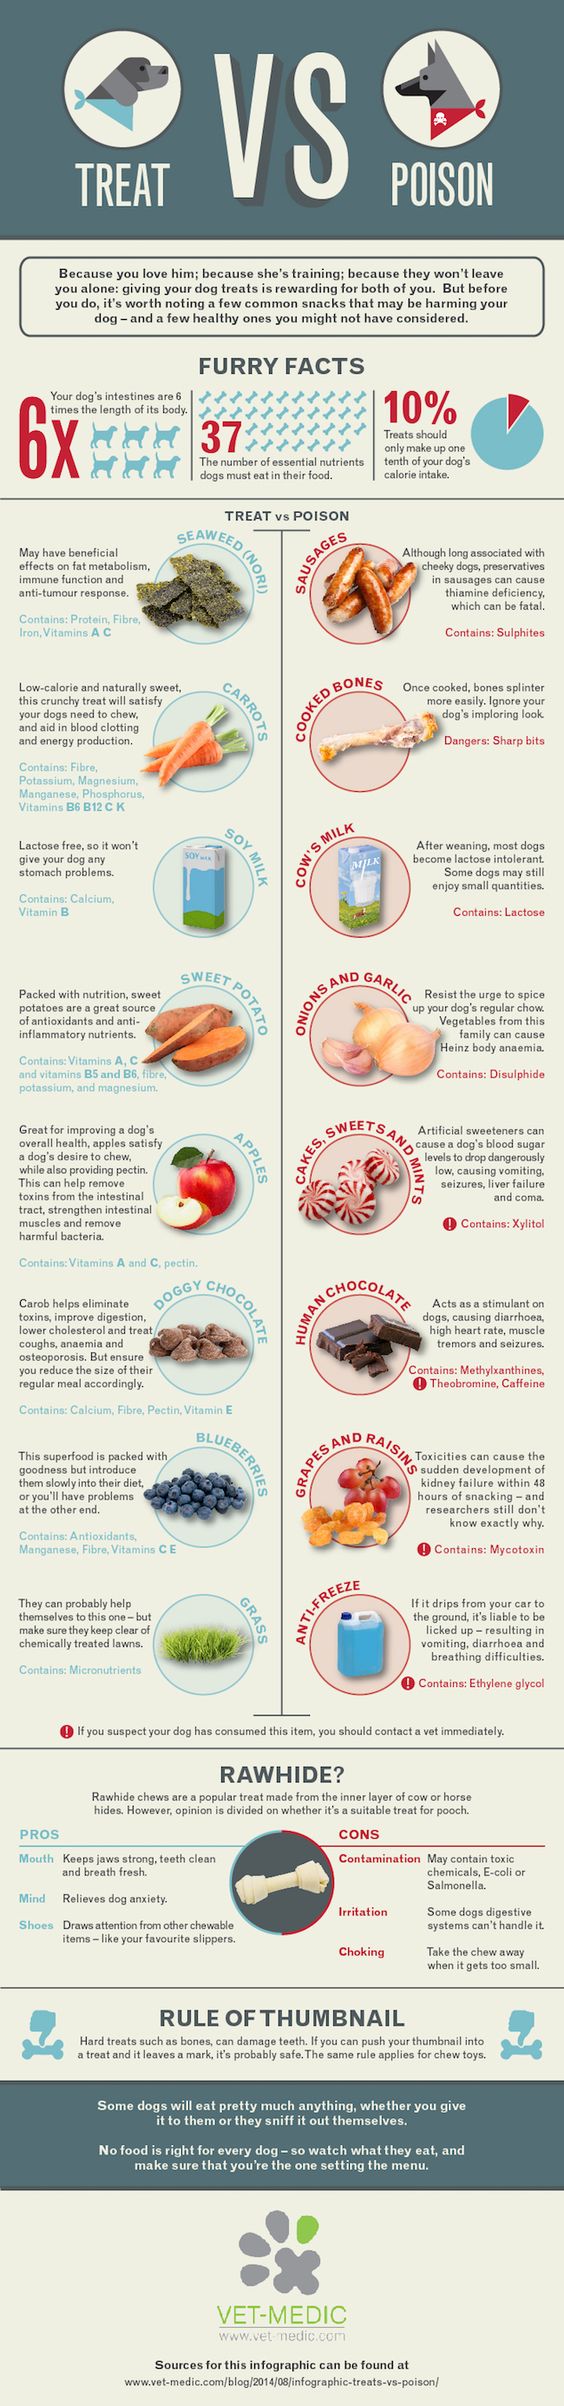 Infographic of good foods and bad foods for dogs. Carrots, apples and blueberries- good! Grapes, onions, garlic and chocolate - bad!